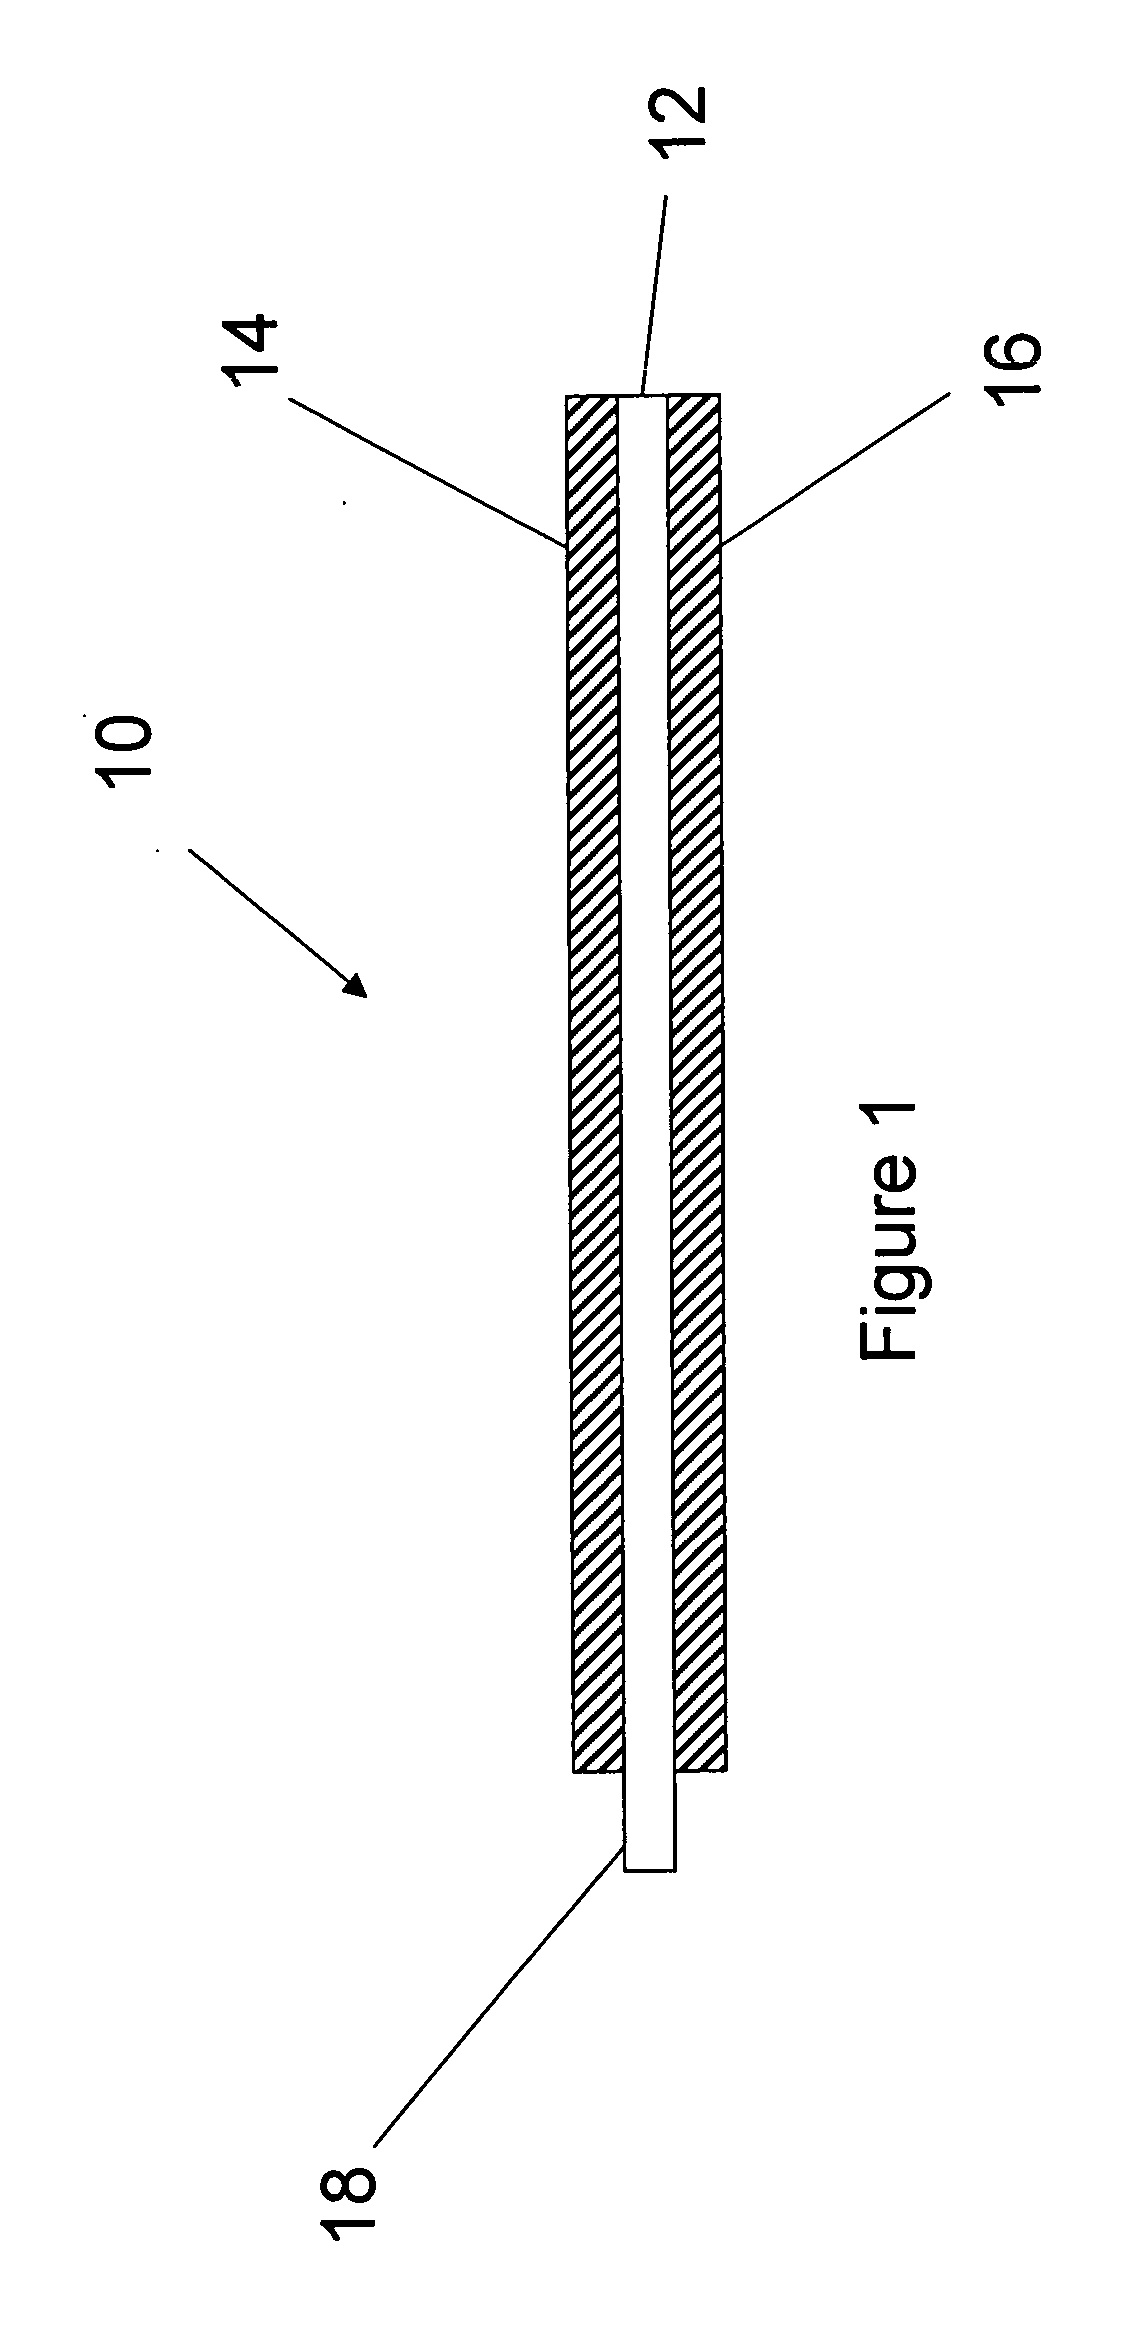 Flexible dielectric film and method for making